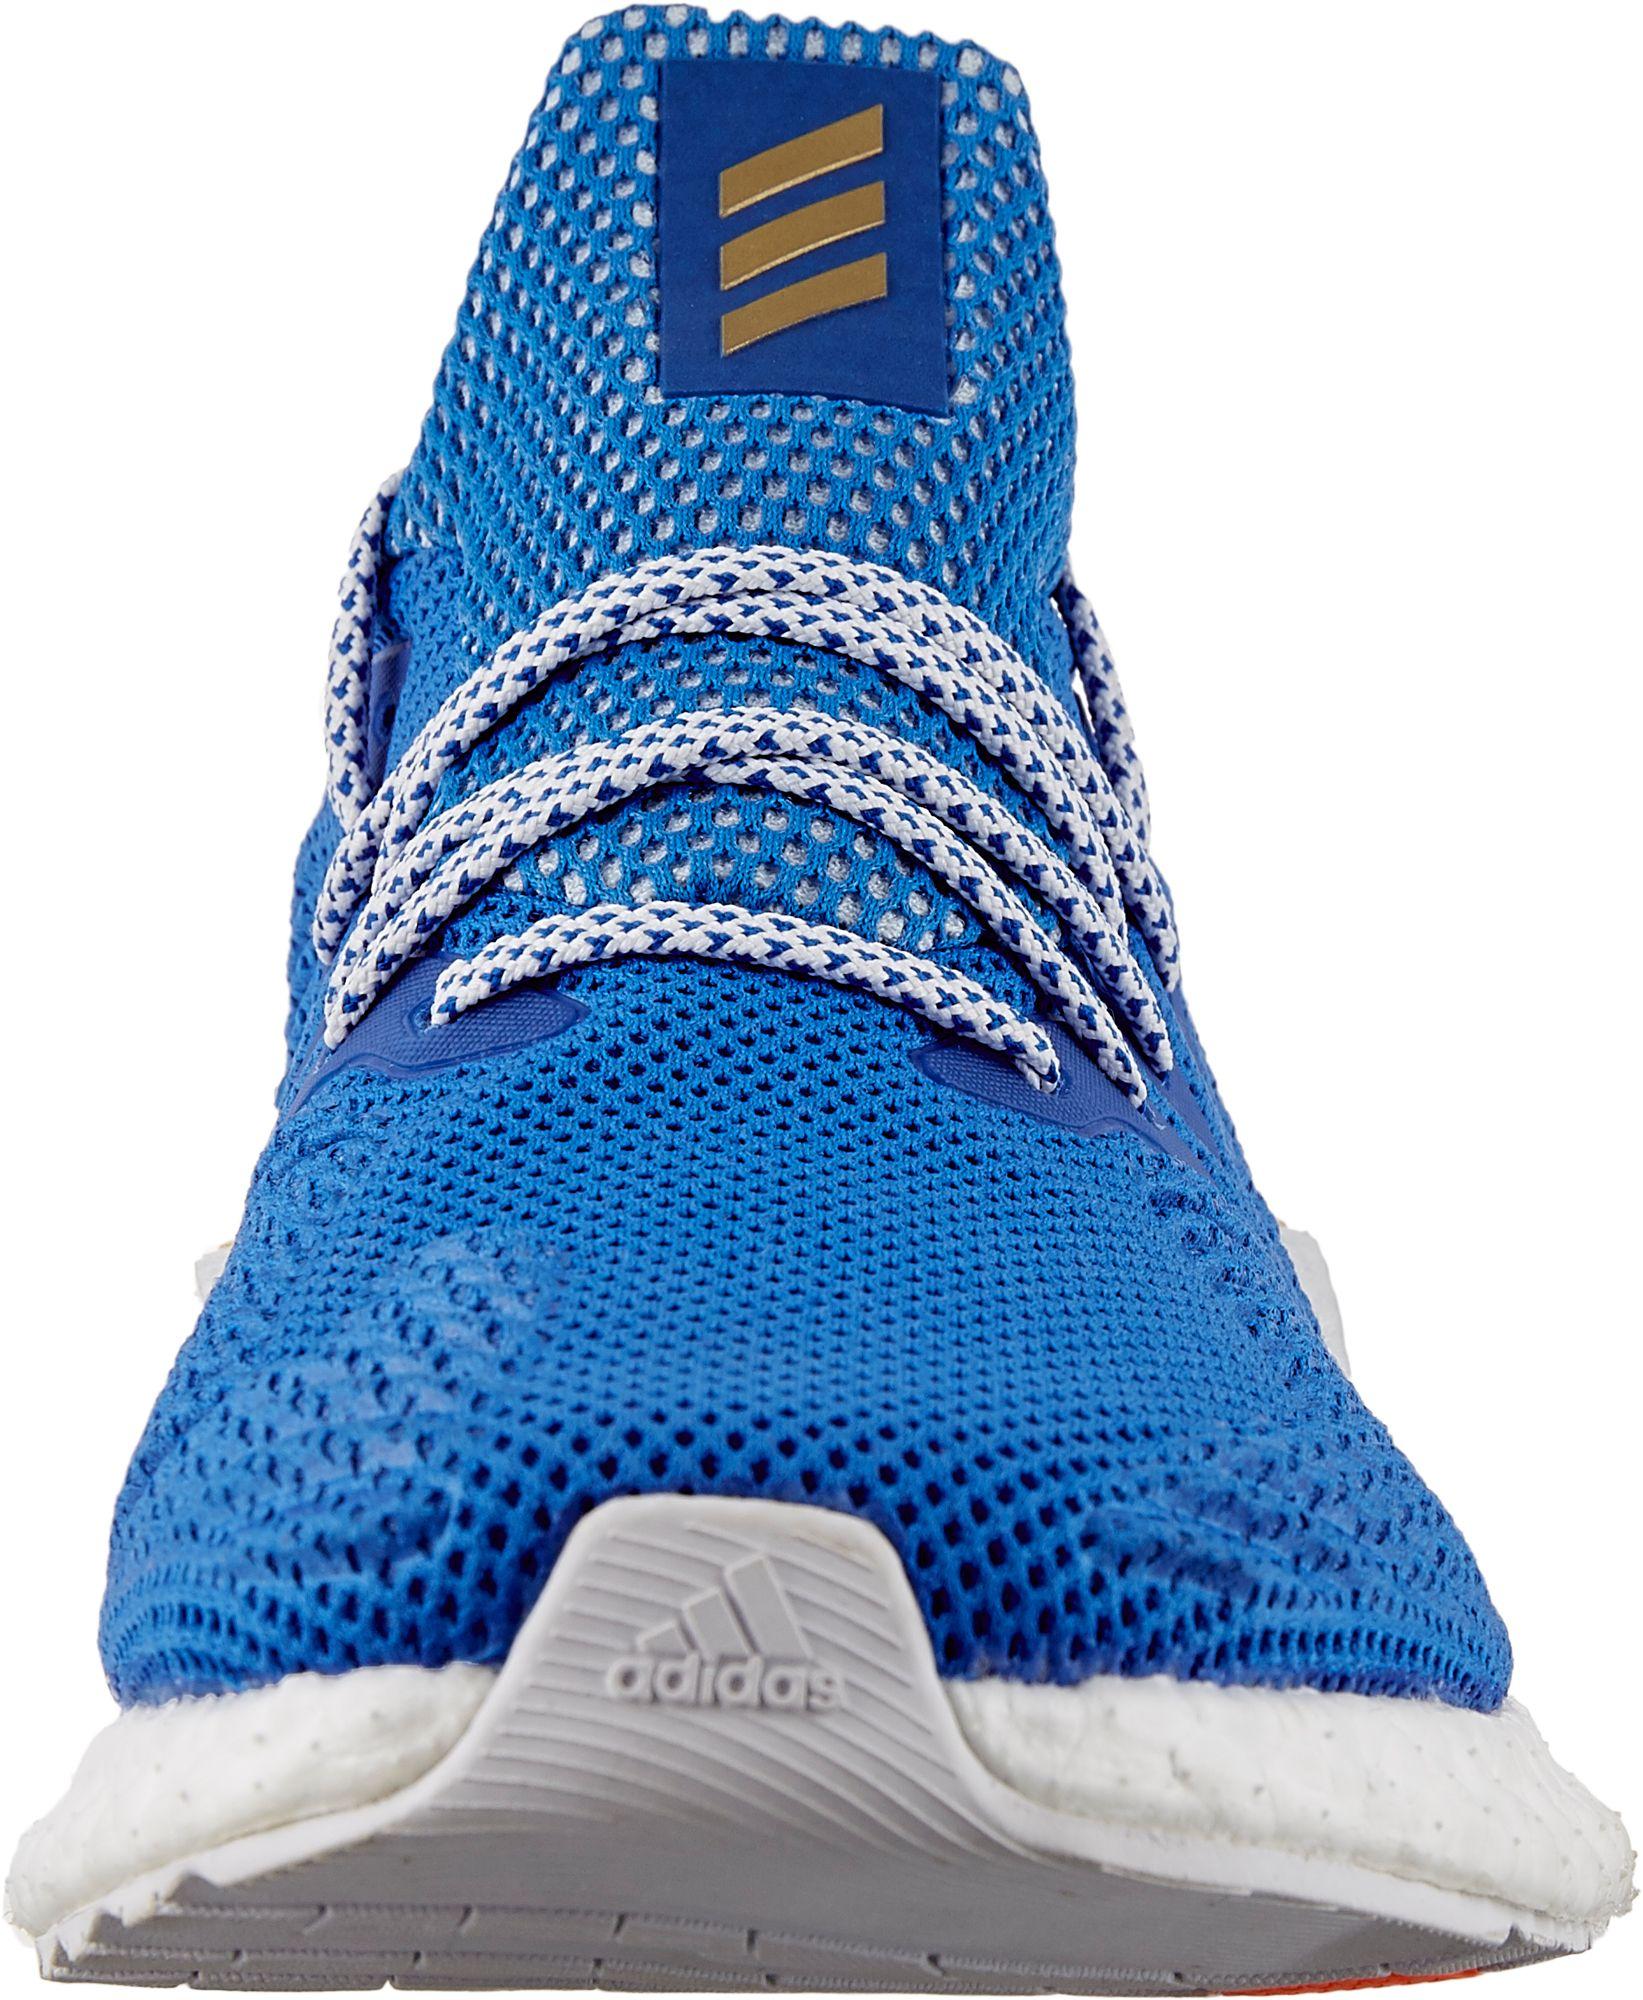 adidas Alphaboost Running Shoes in Blue/White (Blue) for Men - Lyst